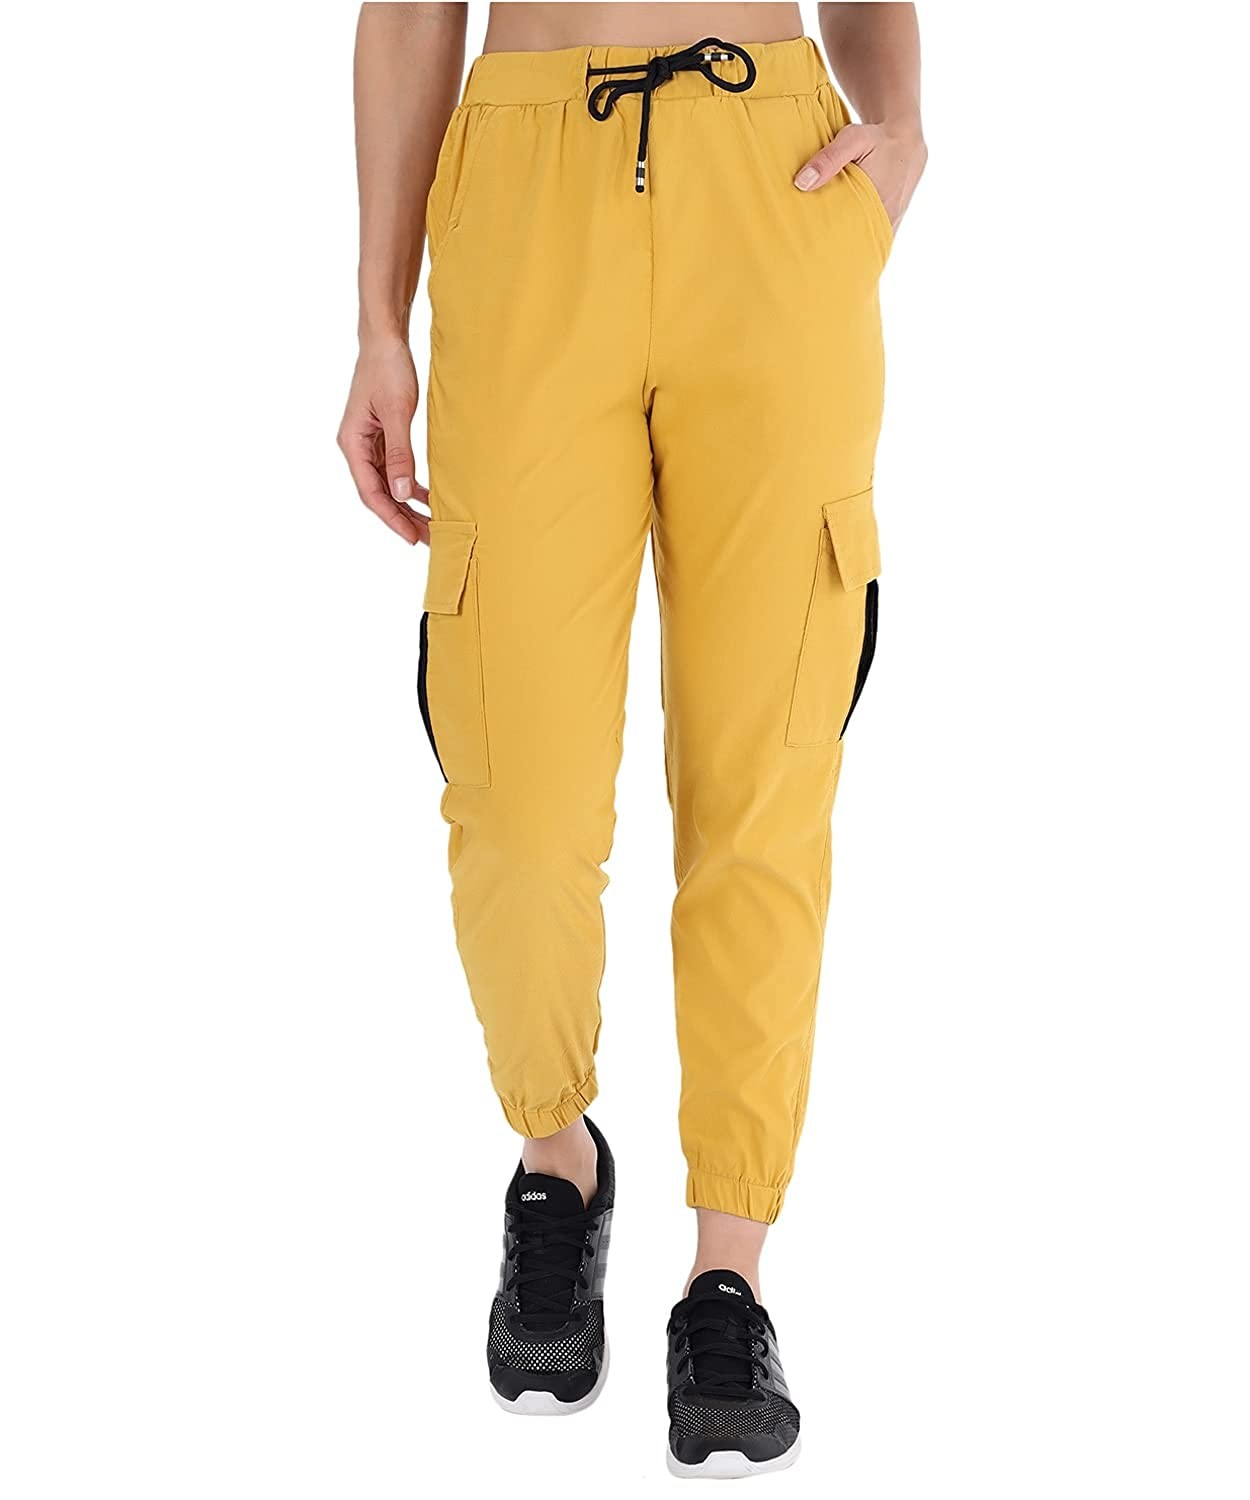 The model in the image is wearing Yellow Double Pocket Corgo Pant from Alice Milan. Crafted with the finest materials and impeccable attention to detail, the Cargo Pant looks premium, trendy, luxurious and offers unparalleled comfort. It’s a perfect clothing option for loungewear, resort wear, party wear or for an airport look. The woman in the image looks happy, and confident with her style statement putting a happy smile on her face.